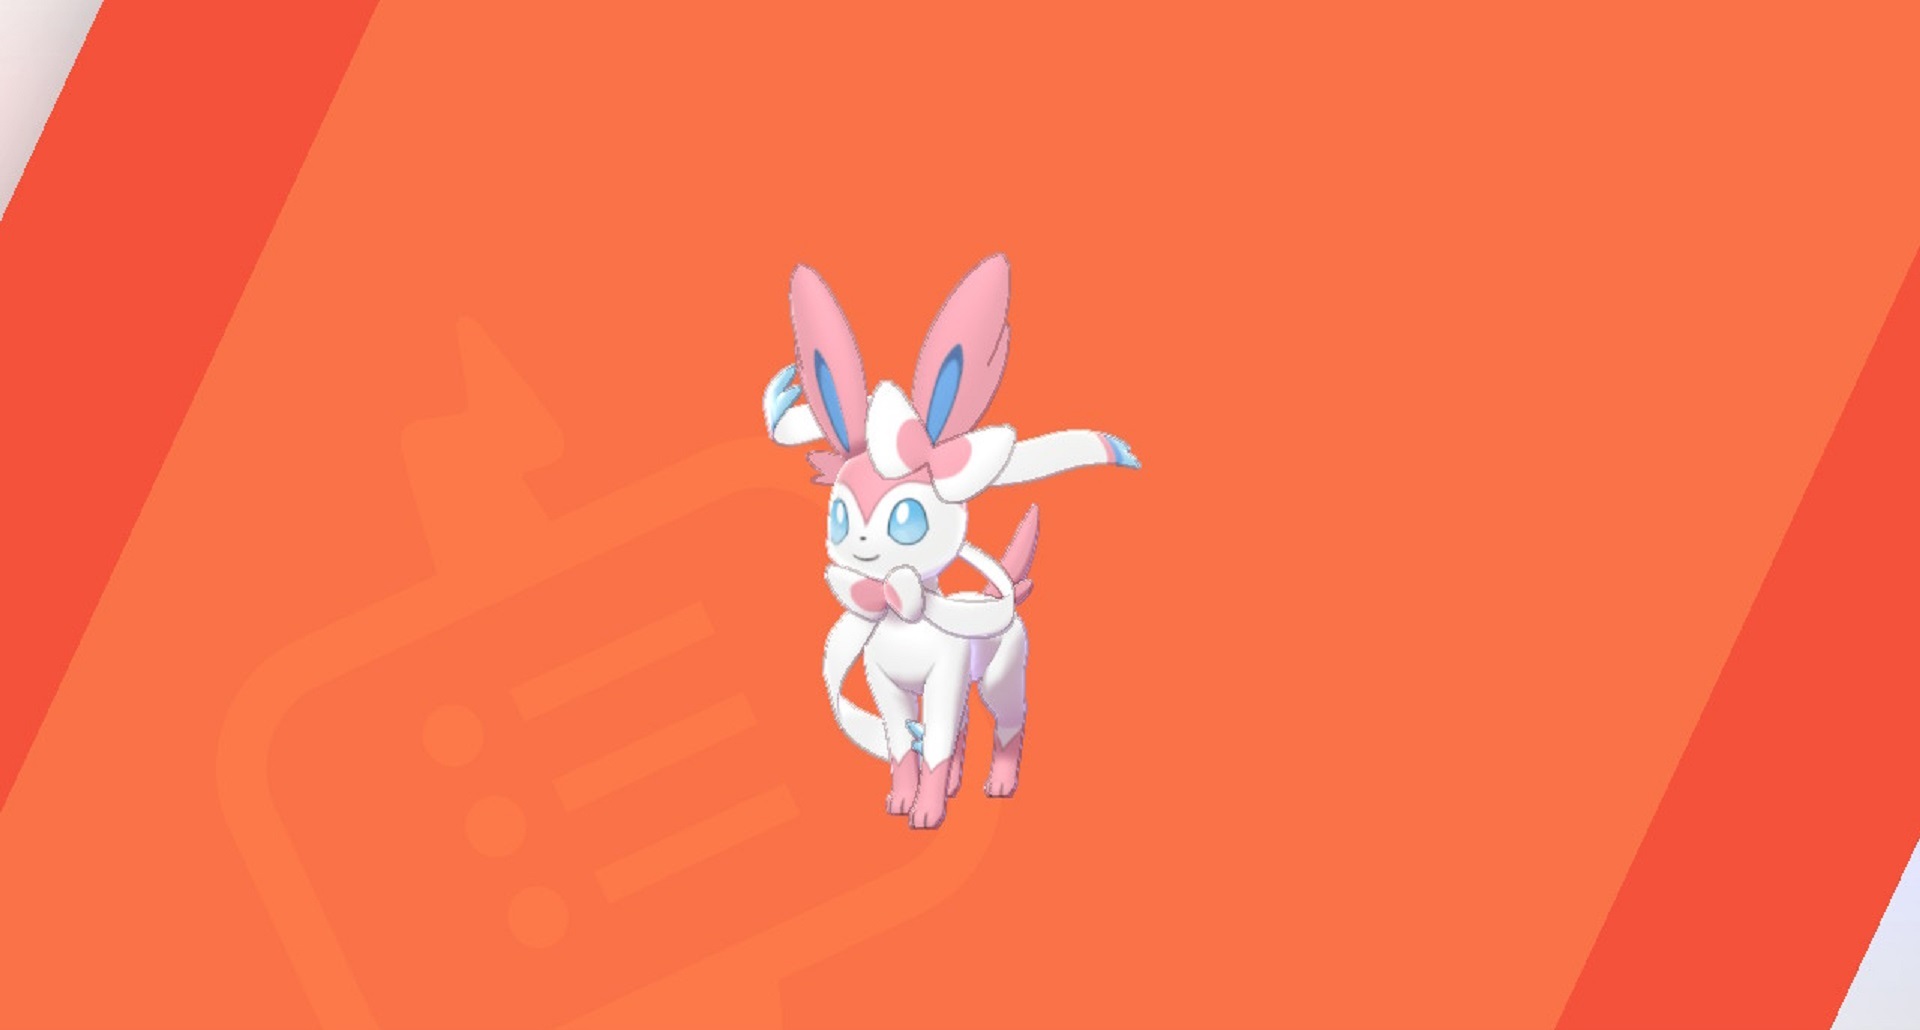 Pokémon Eevee evolutions: Sylveon against a red background.